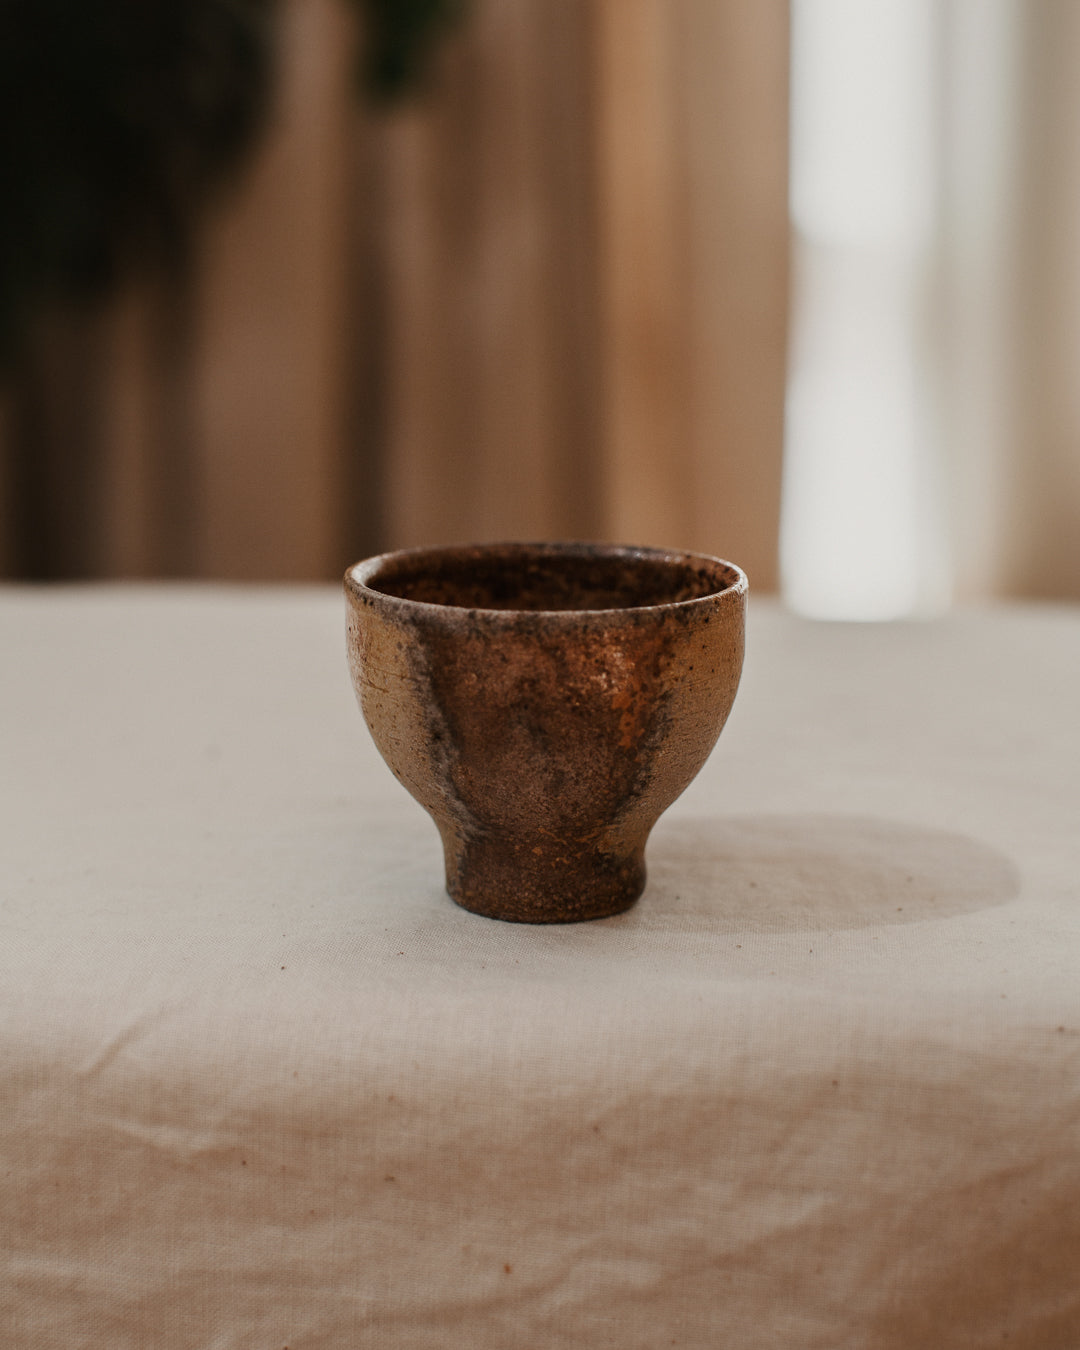 wood fired cup i